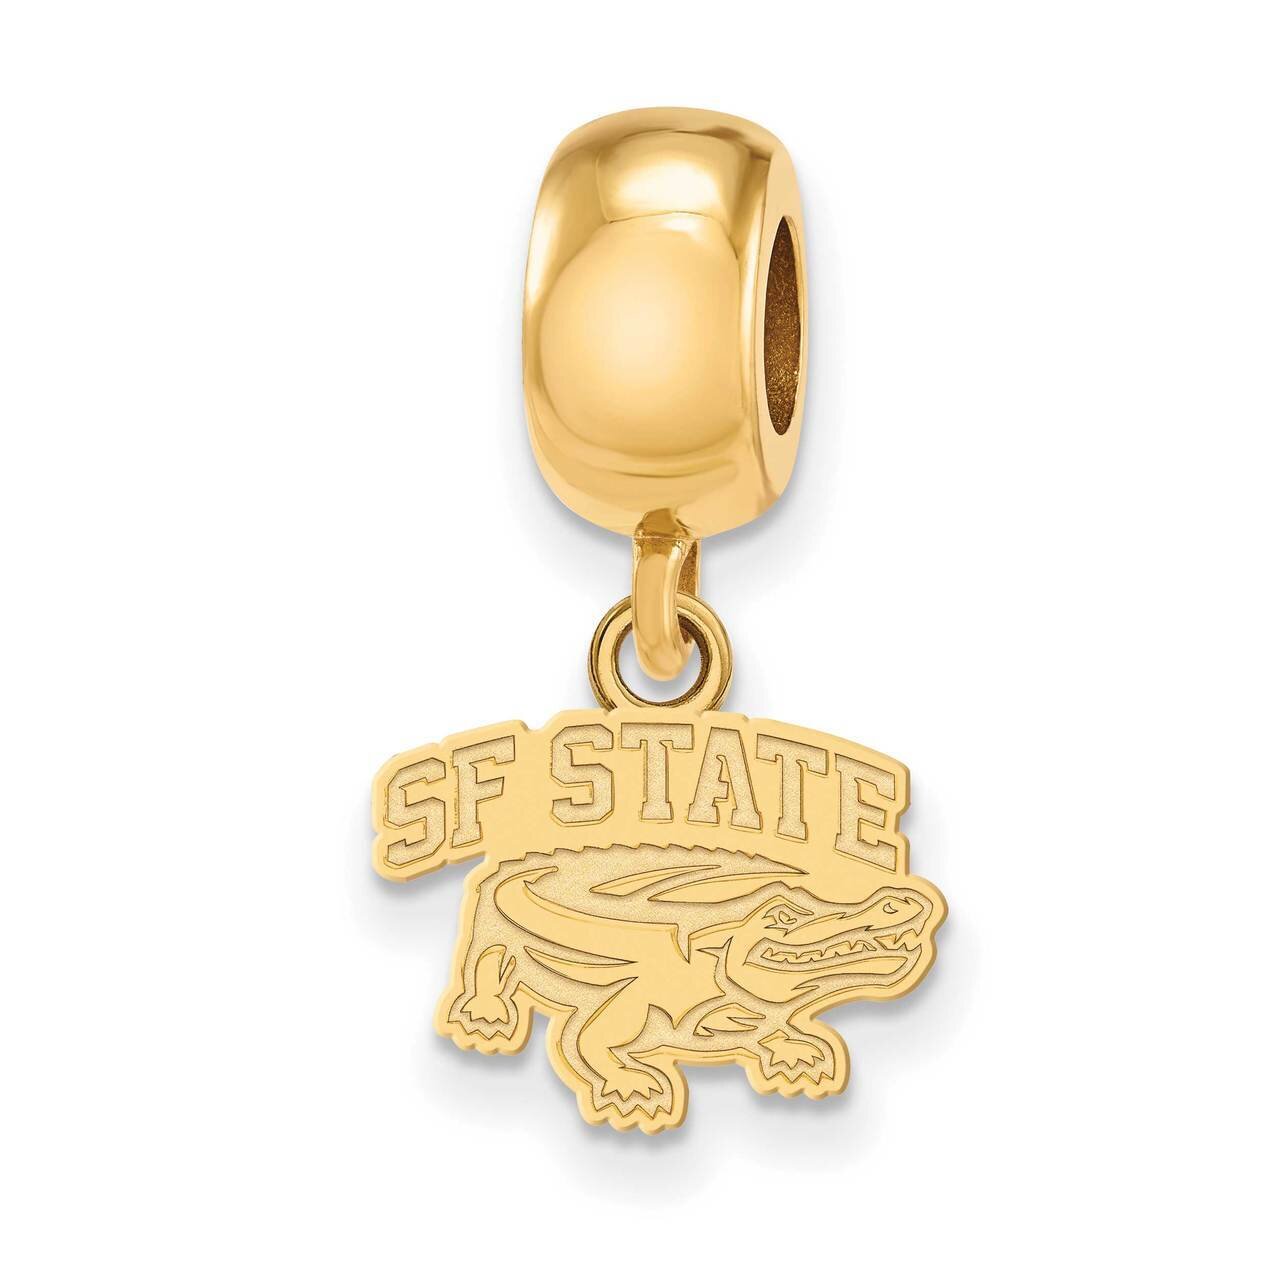 San Francisco State University Bead Charm x-Small Dangle Gold-plated on Sterling Silver GP009SFU